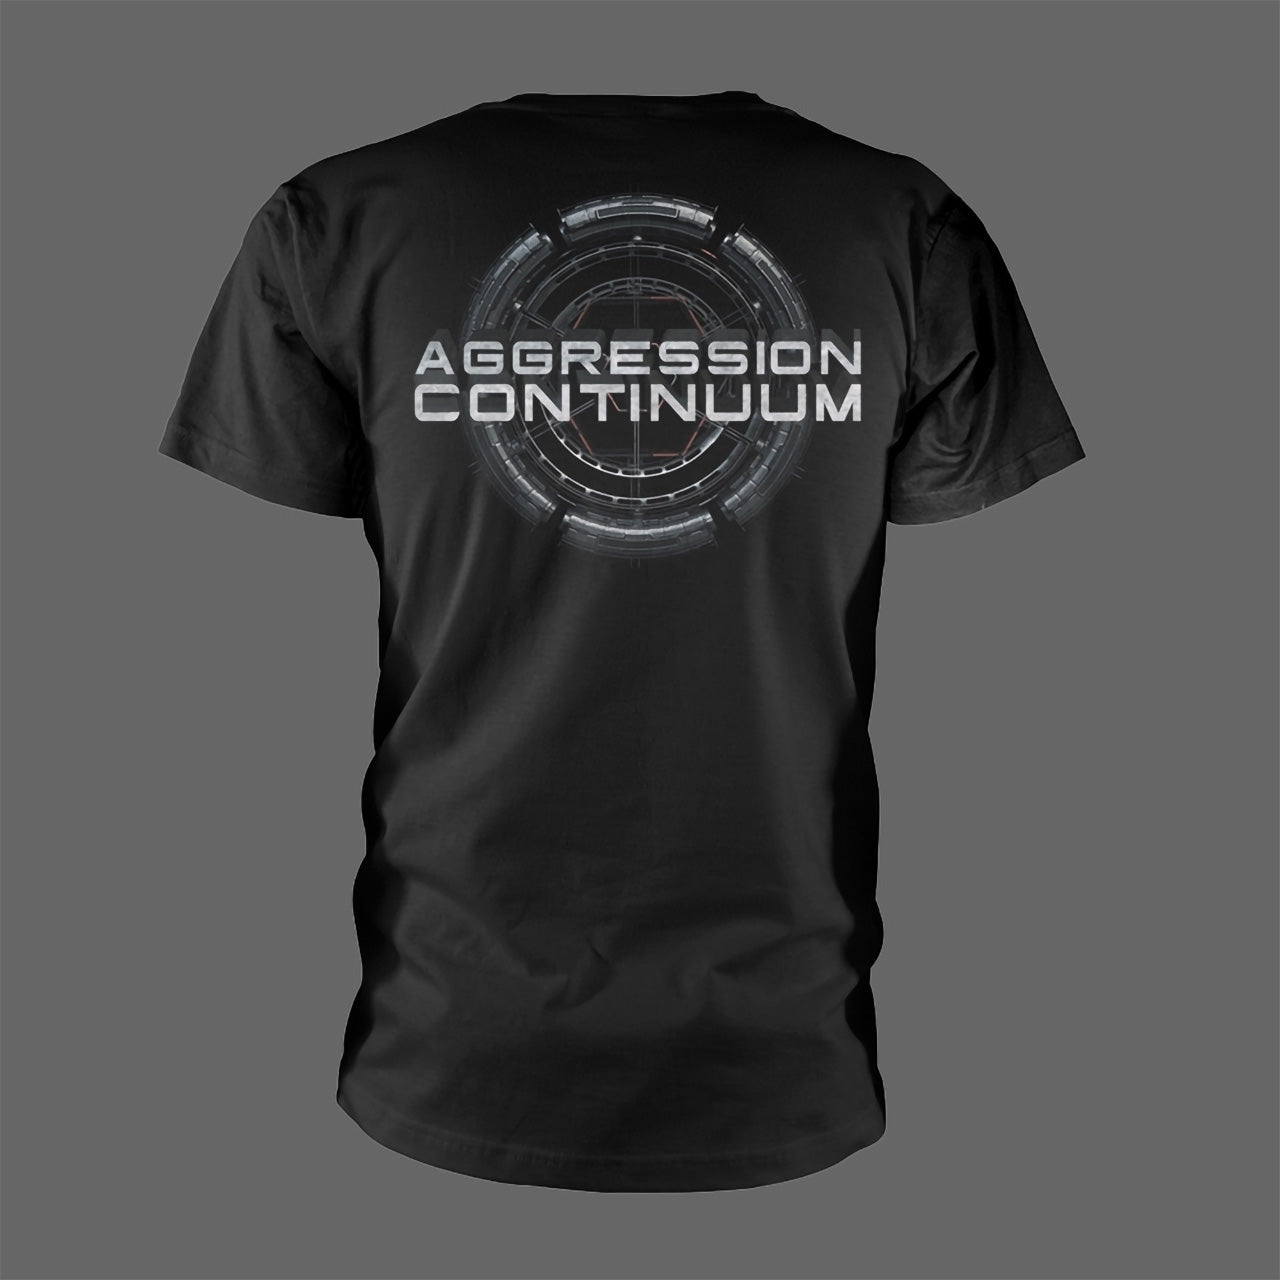 Fear Factory - Aggression Continuum (T-Shirt)